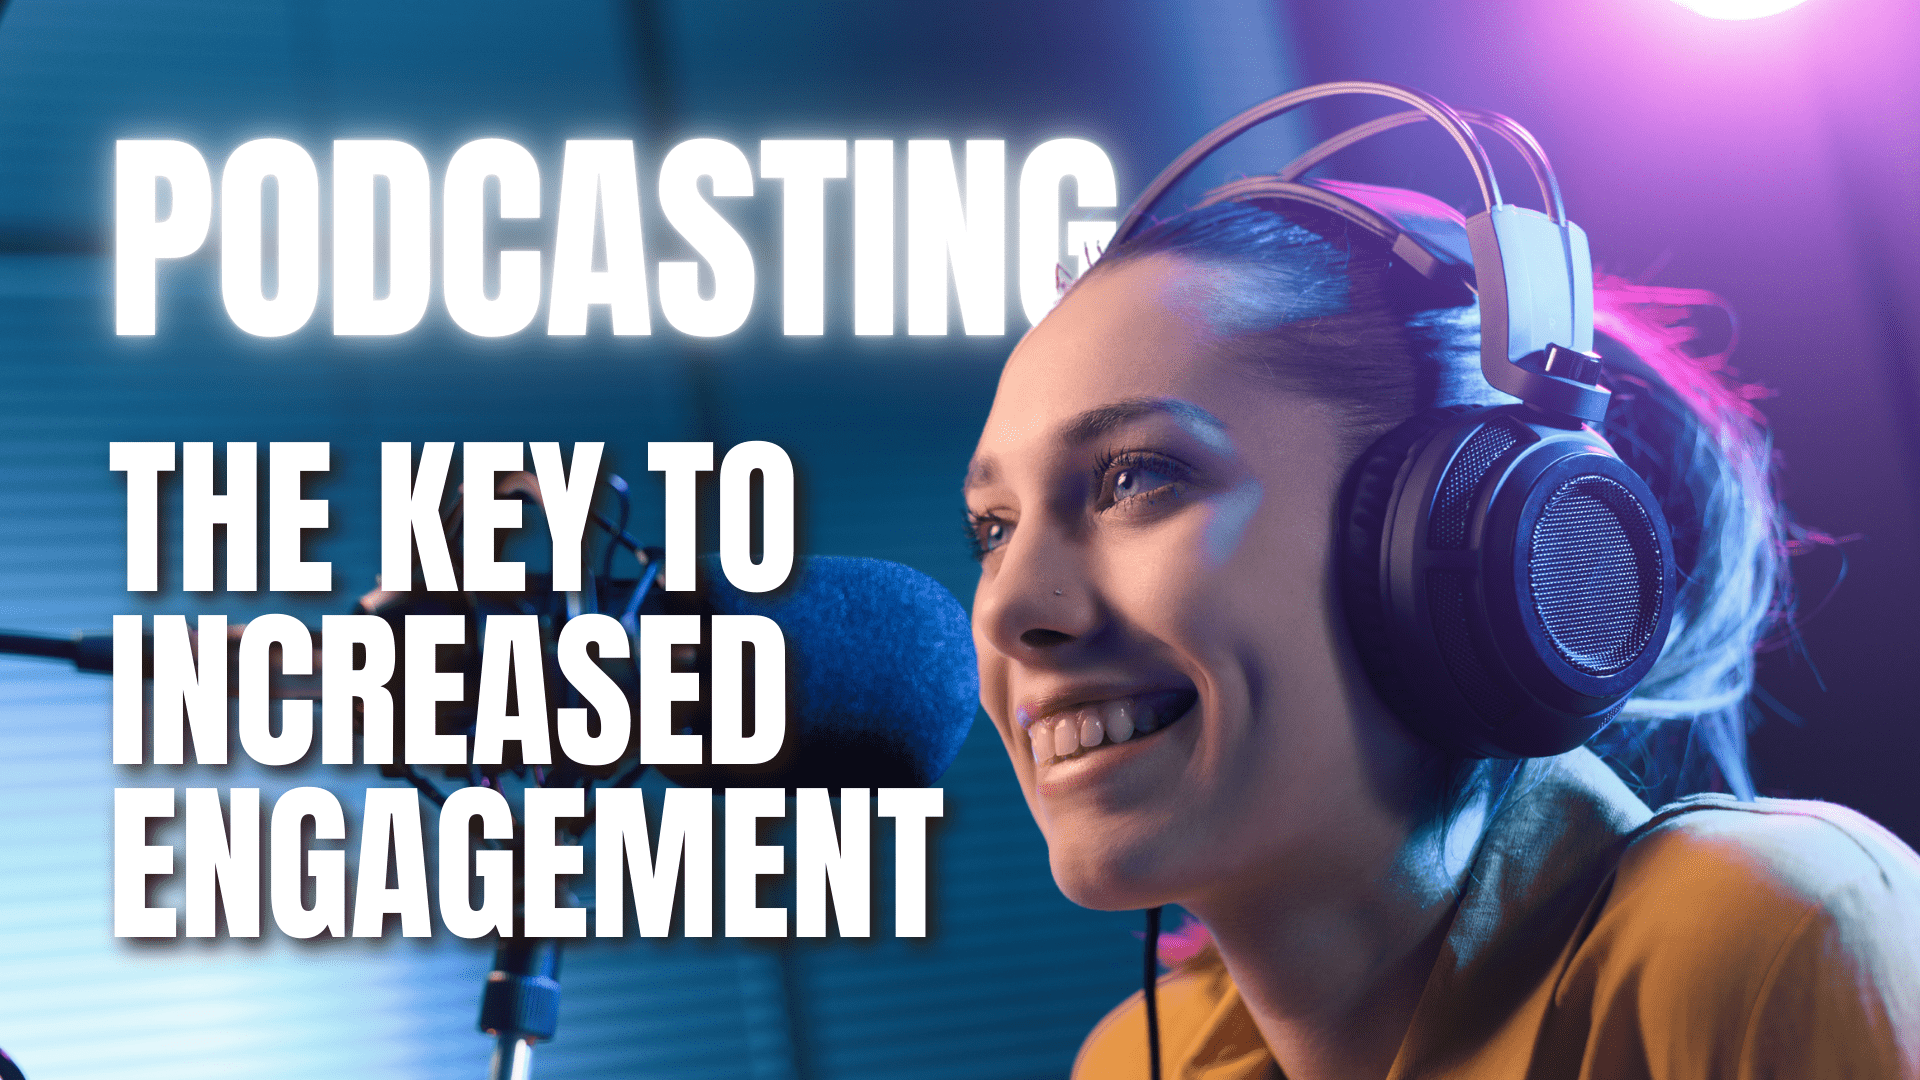 Podcasting: The Key to Increased Engagement